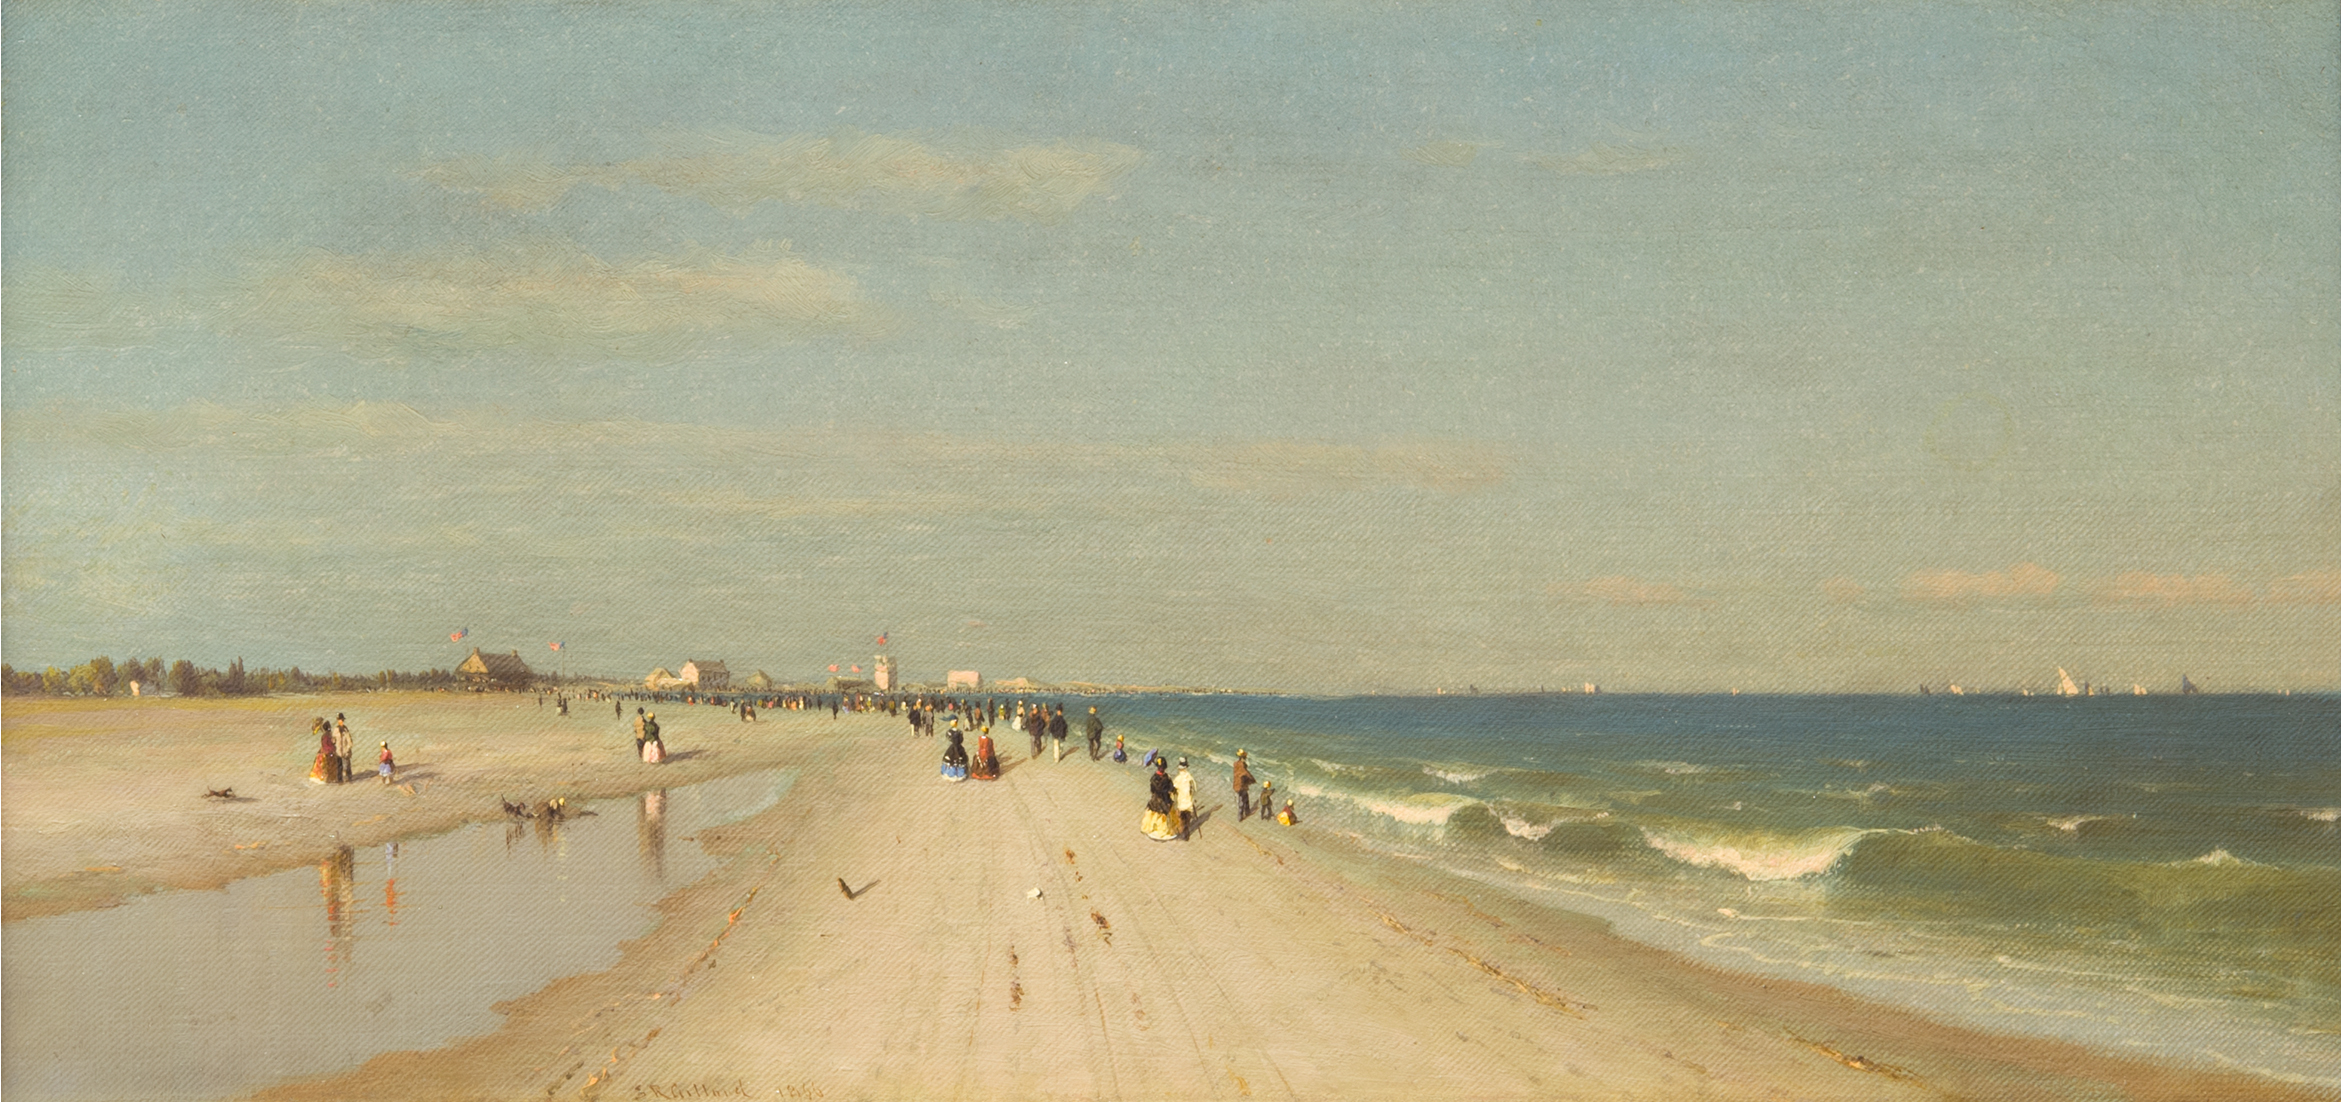 This image depicts a group of people walking down the beach. The ocean is pictured on the right side of the composition. There are many people walking on the beach on the sunny day.